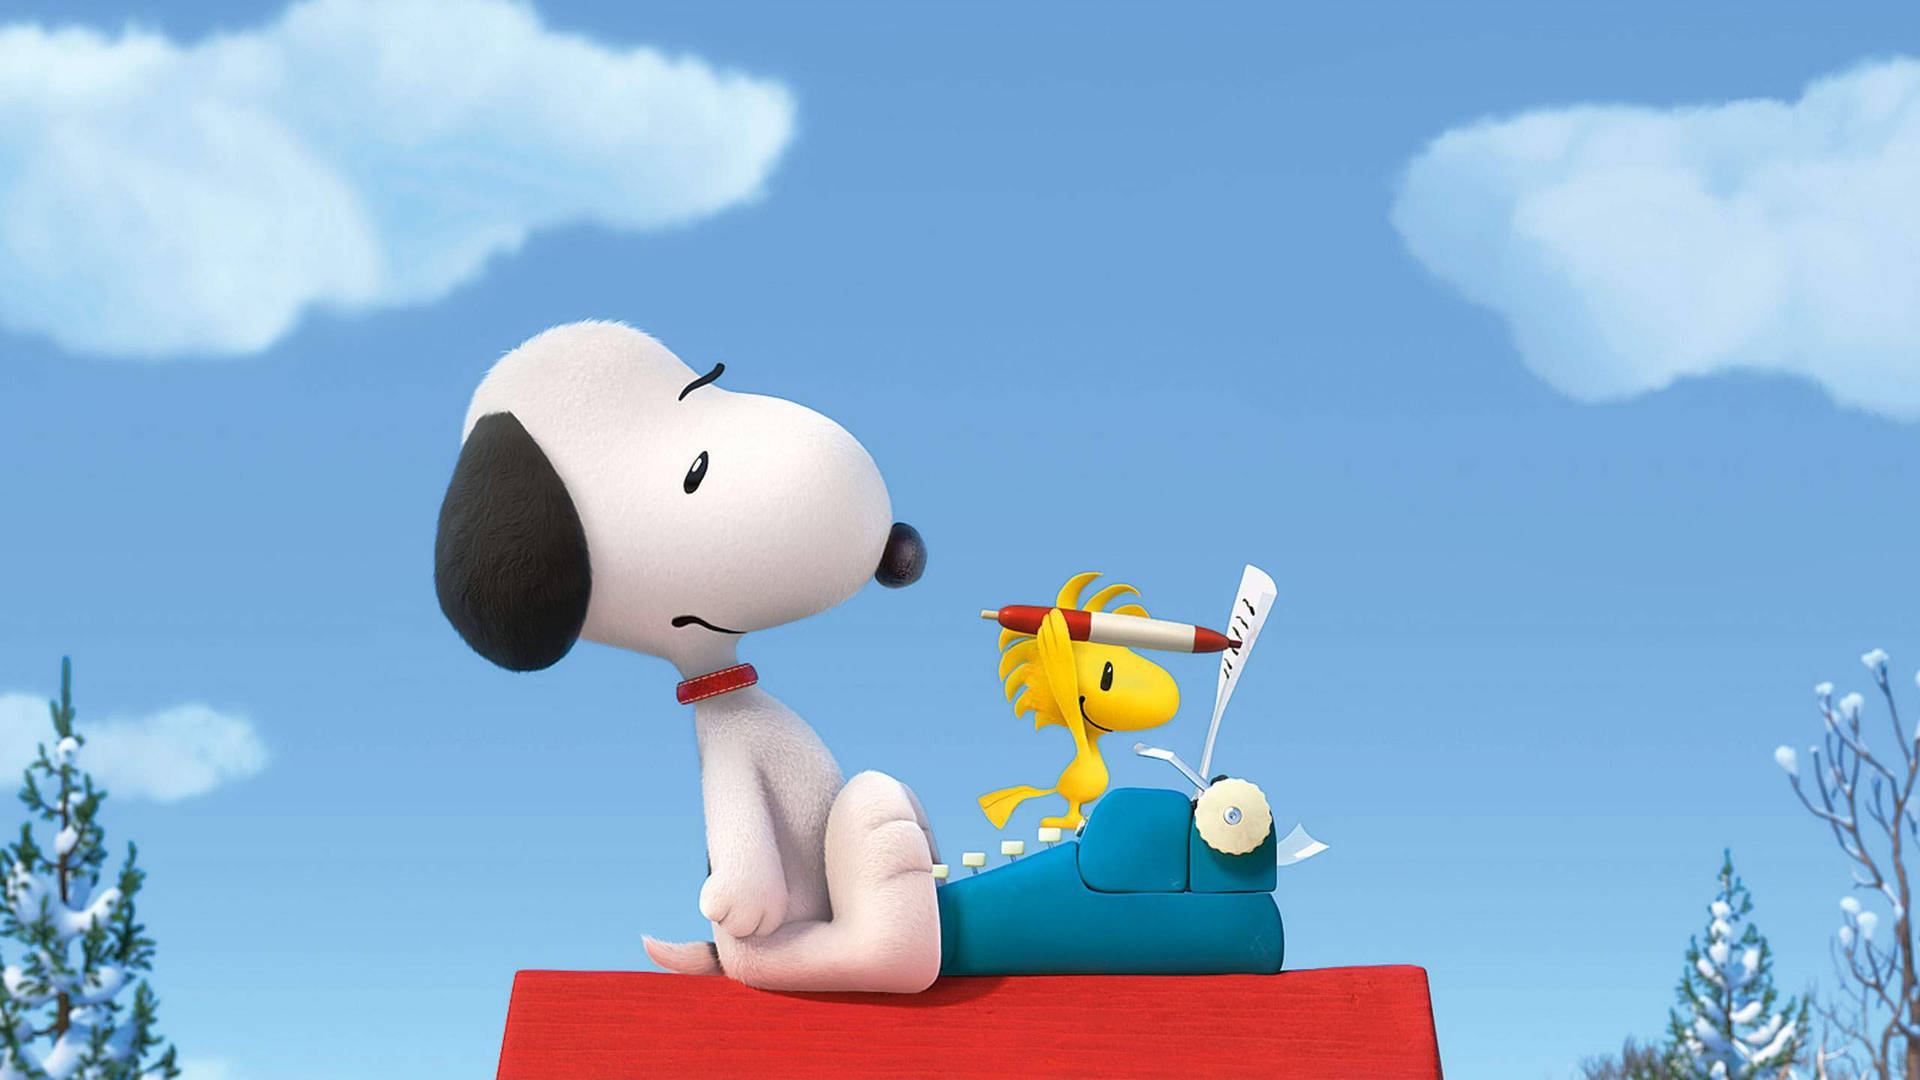 Snoopy and Woodstock Writing a Story Wallpaper